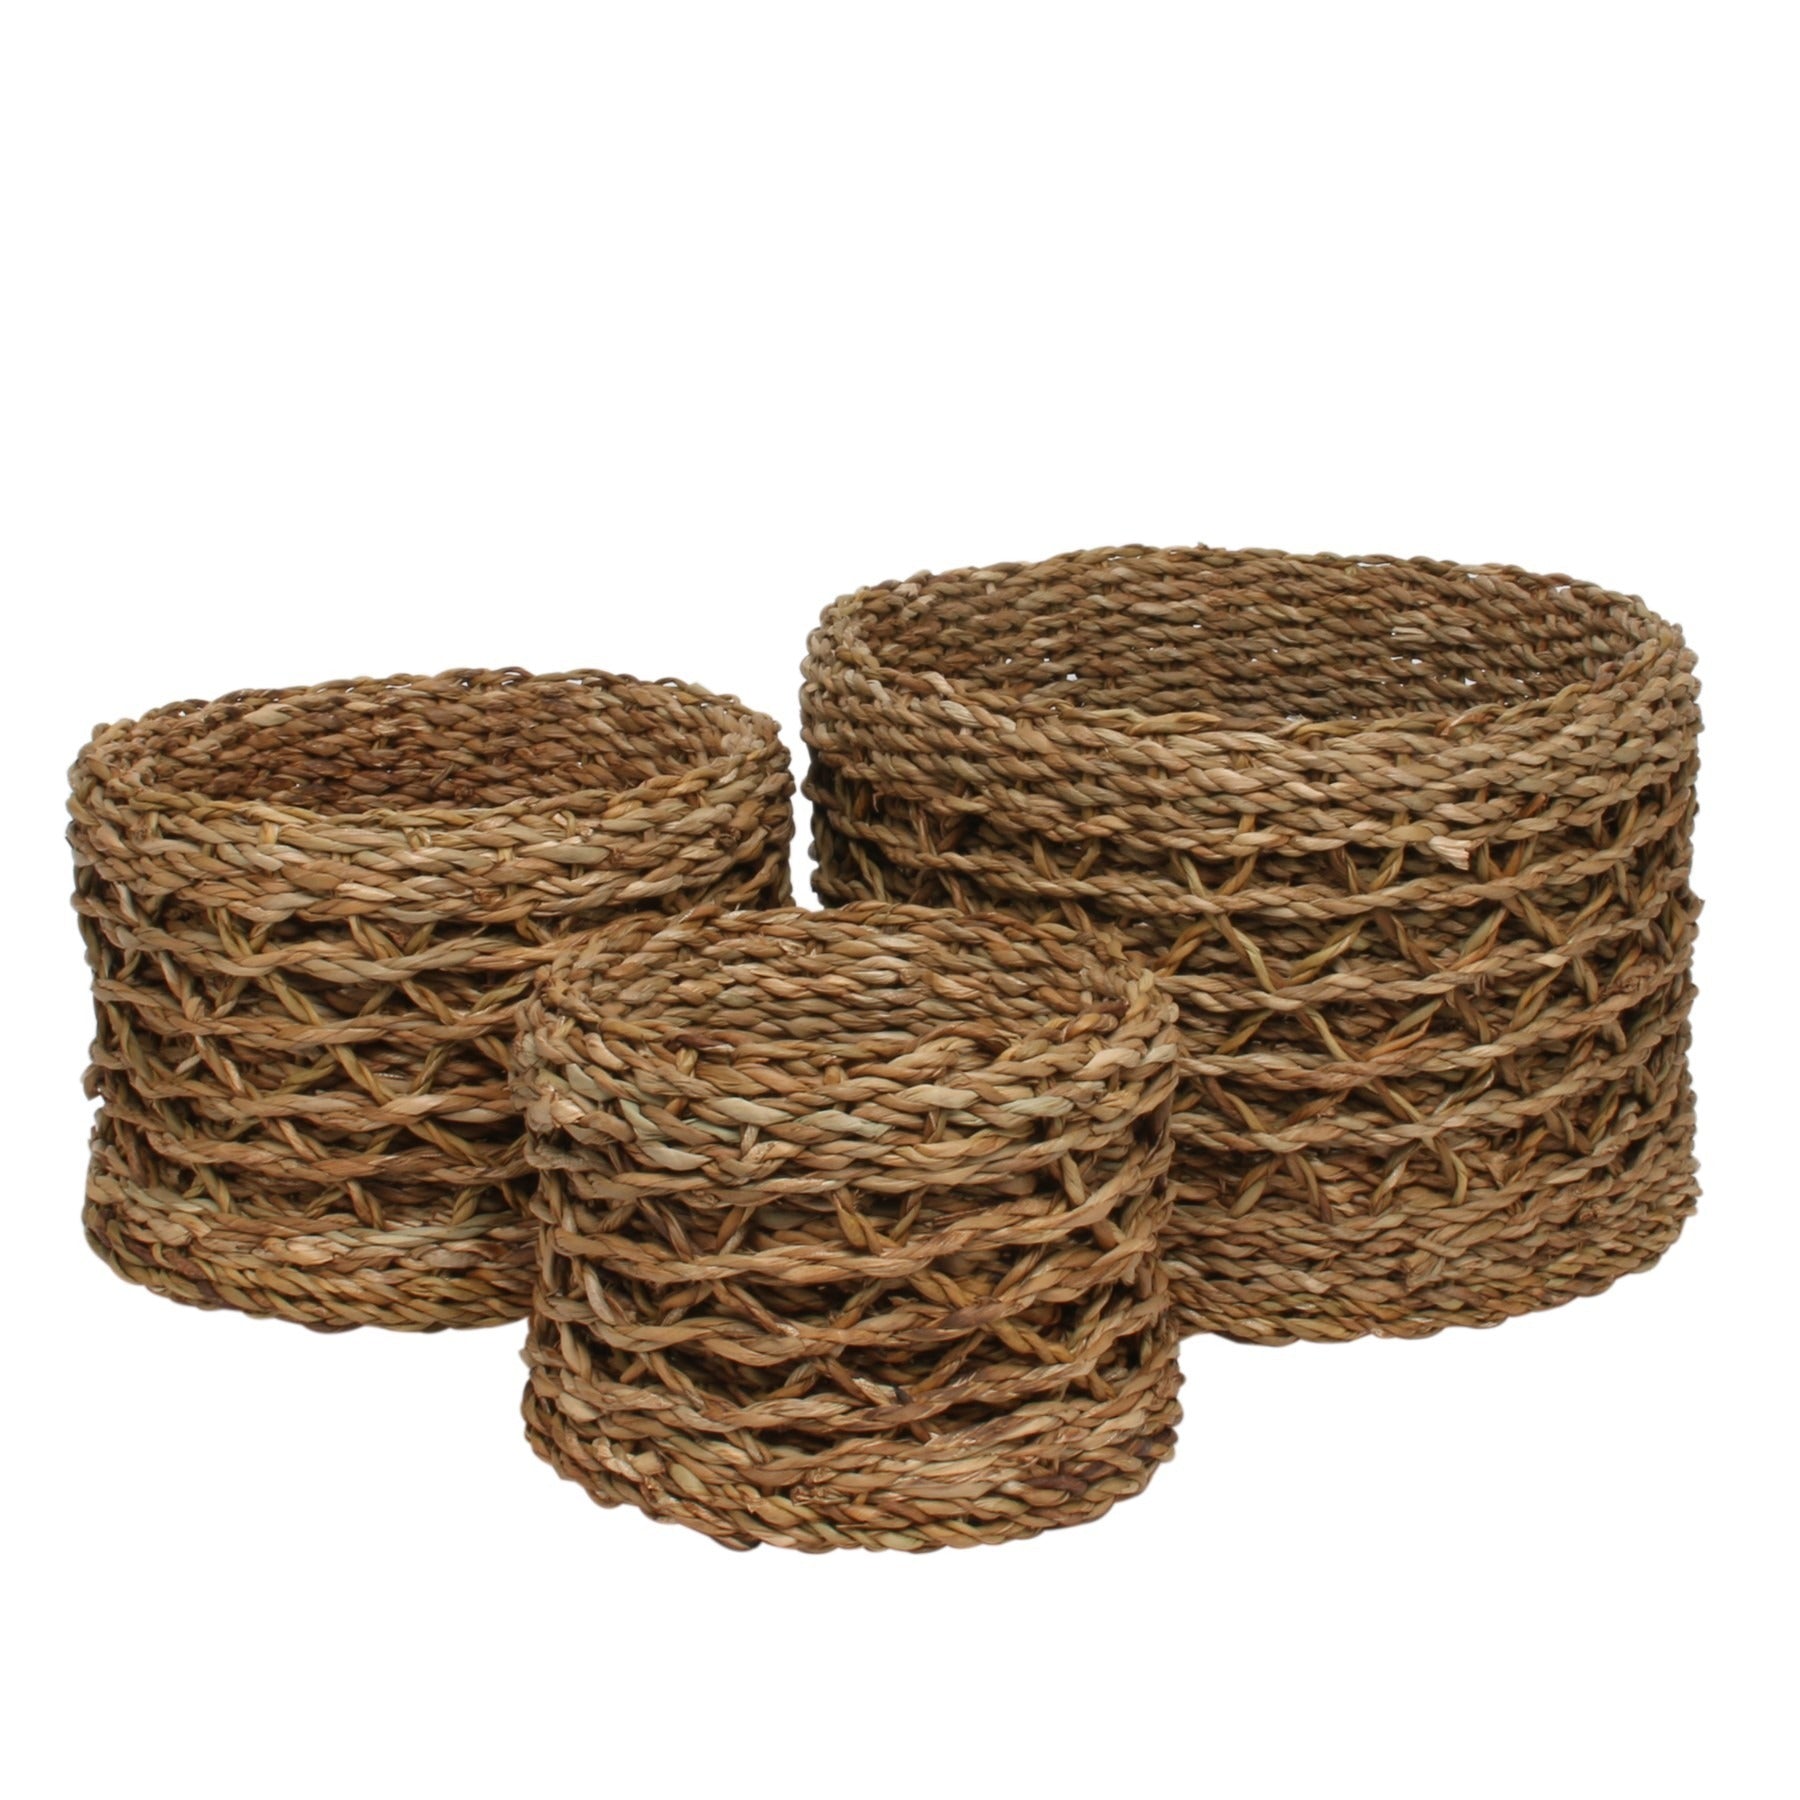 View Set of 3 Round Natural Seagrass Baskets with Liner information